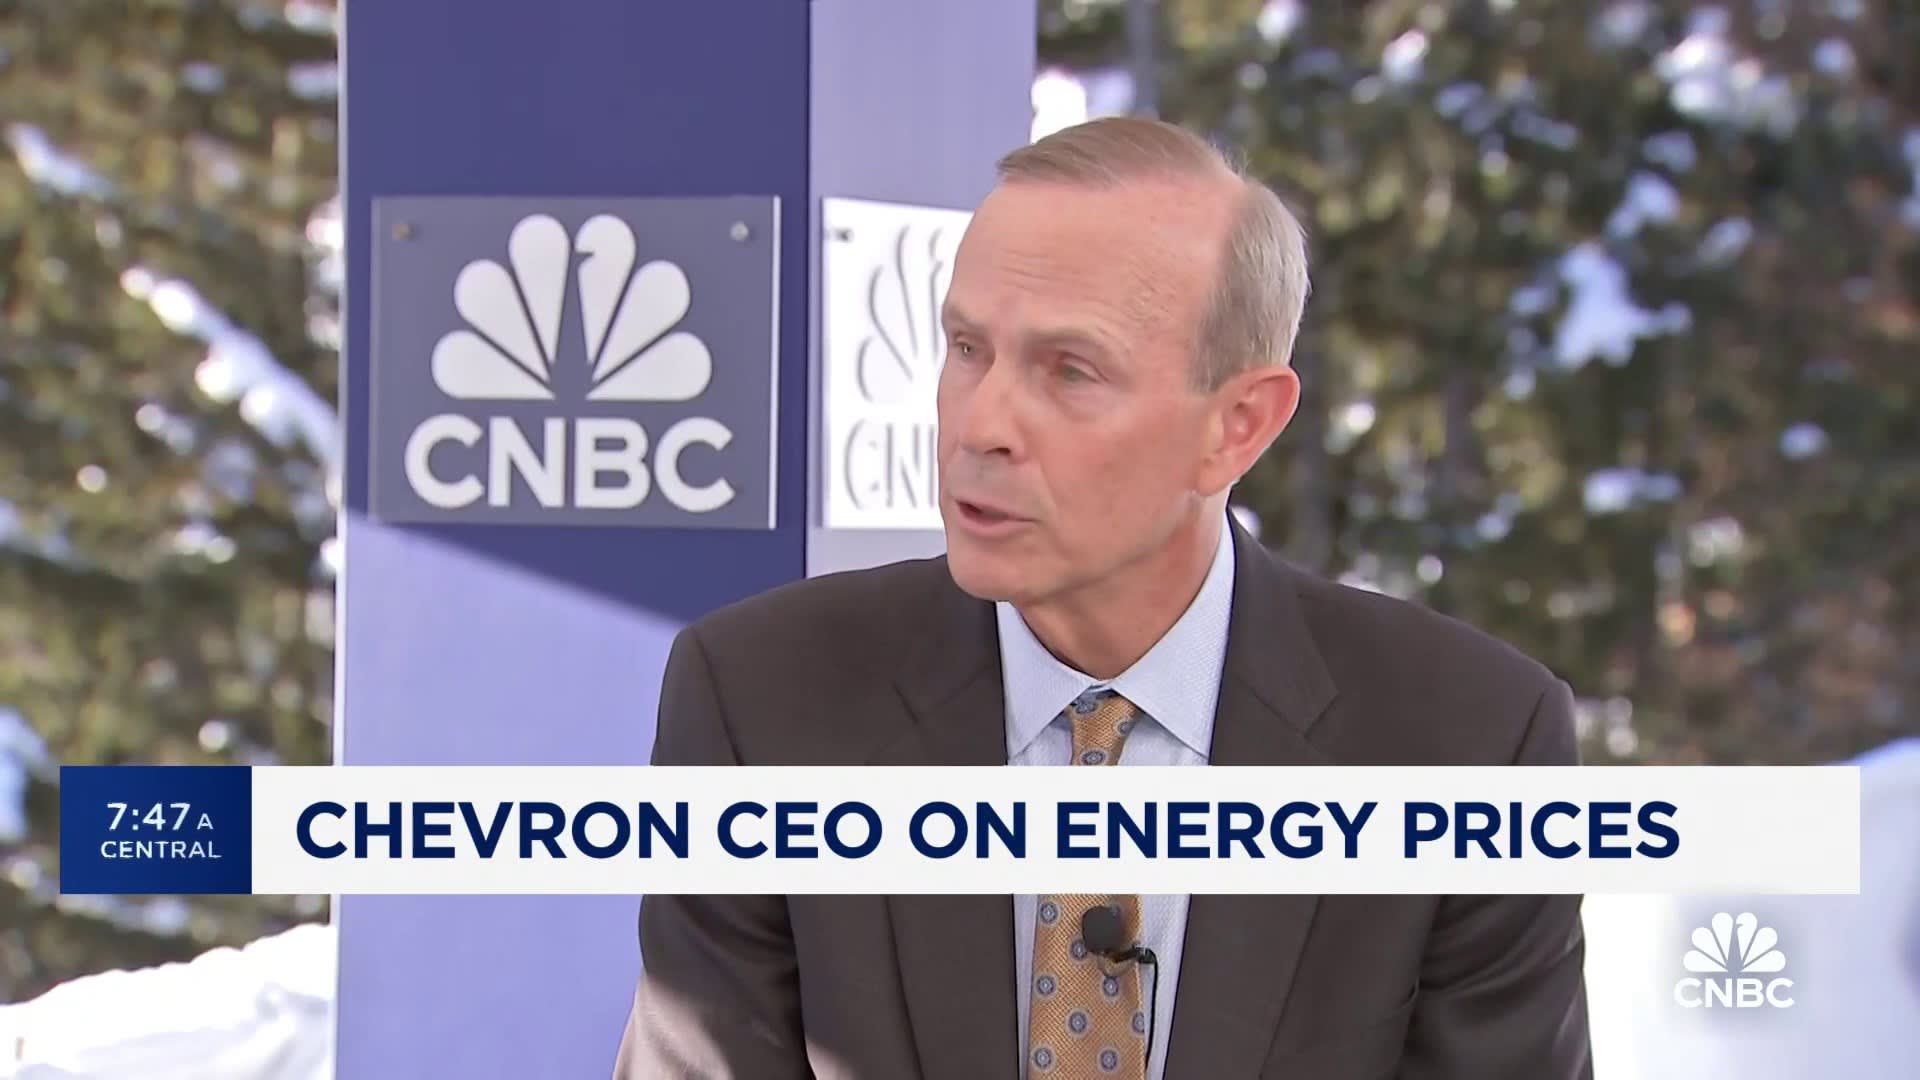 Chevron CEO Mike Wirth on Red Sea attacks, energy transition and oil prices